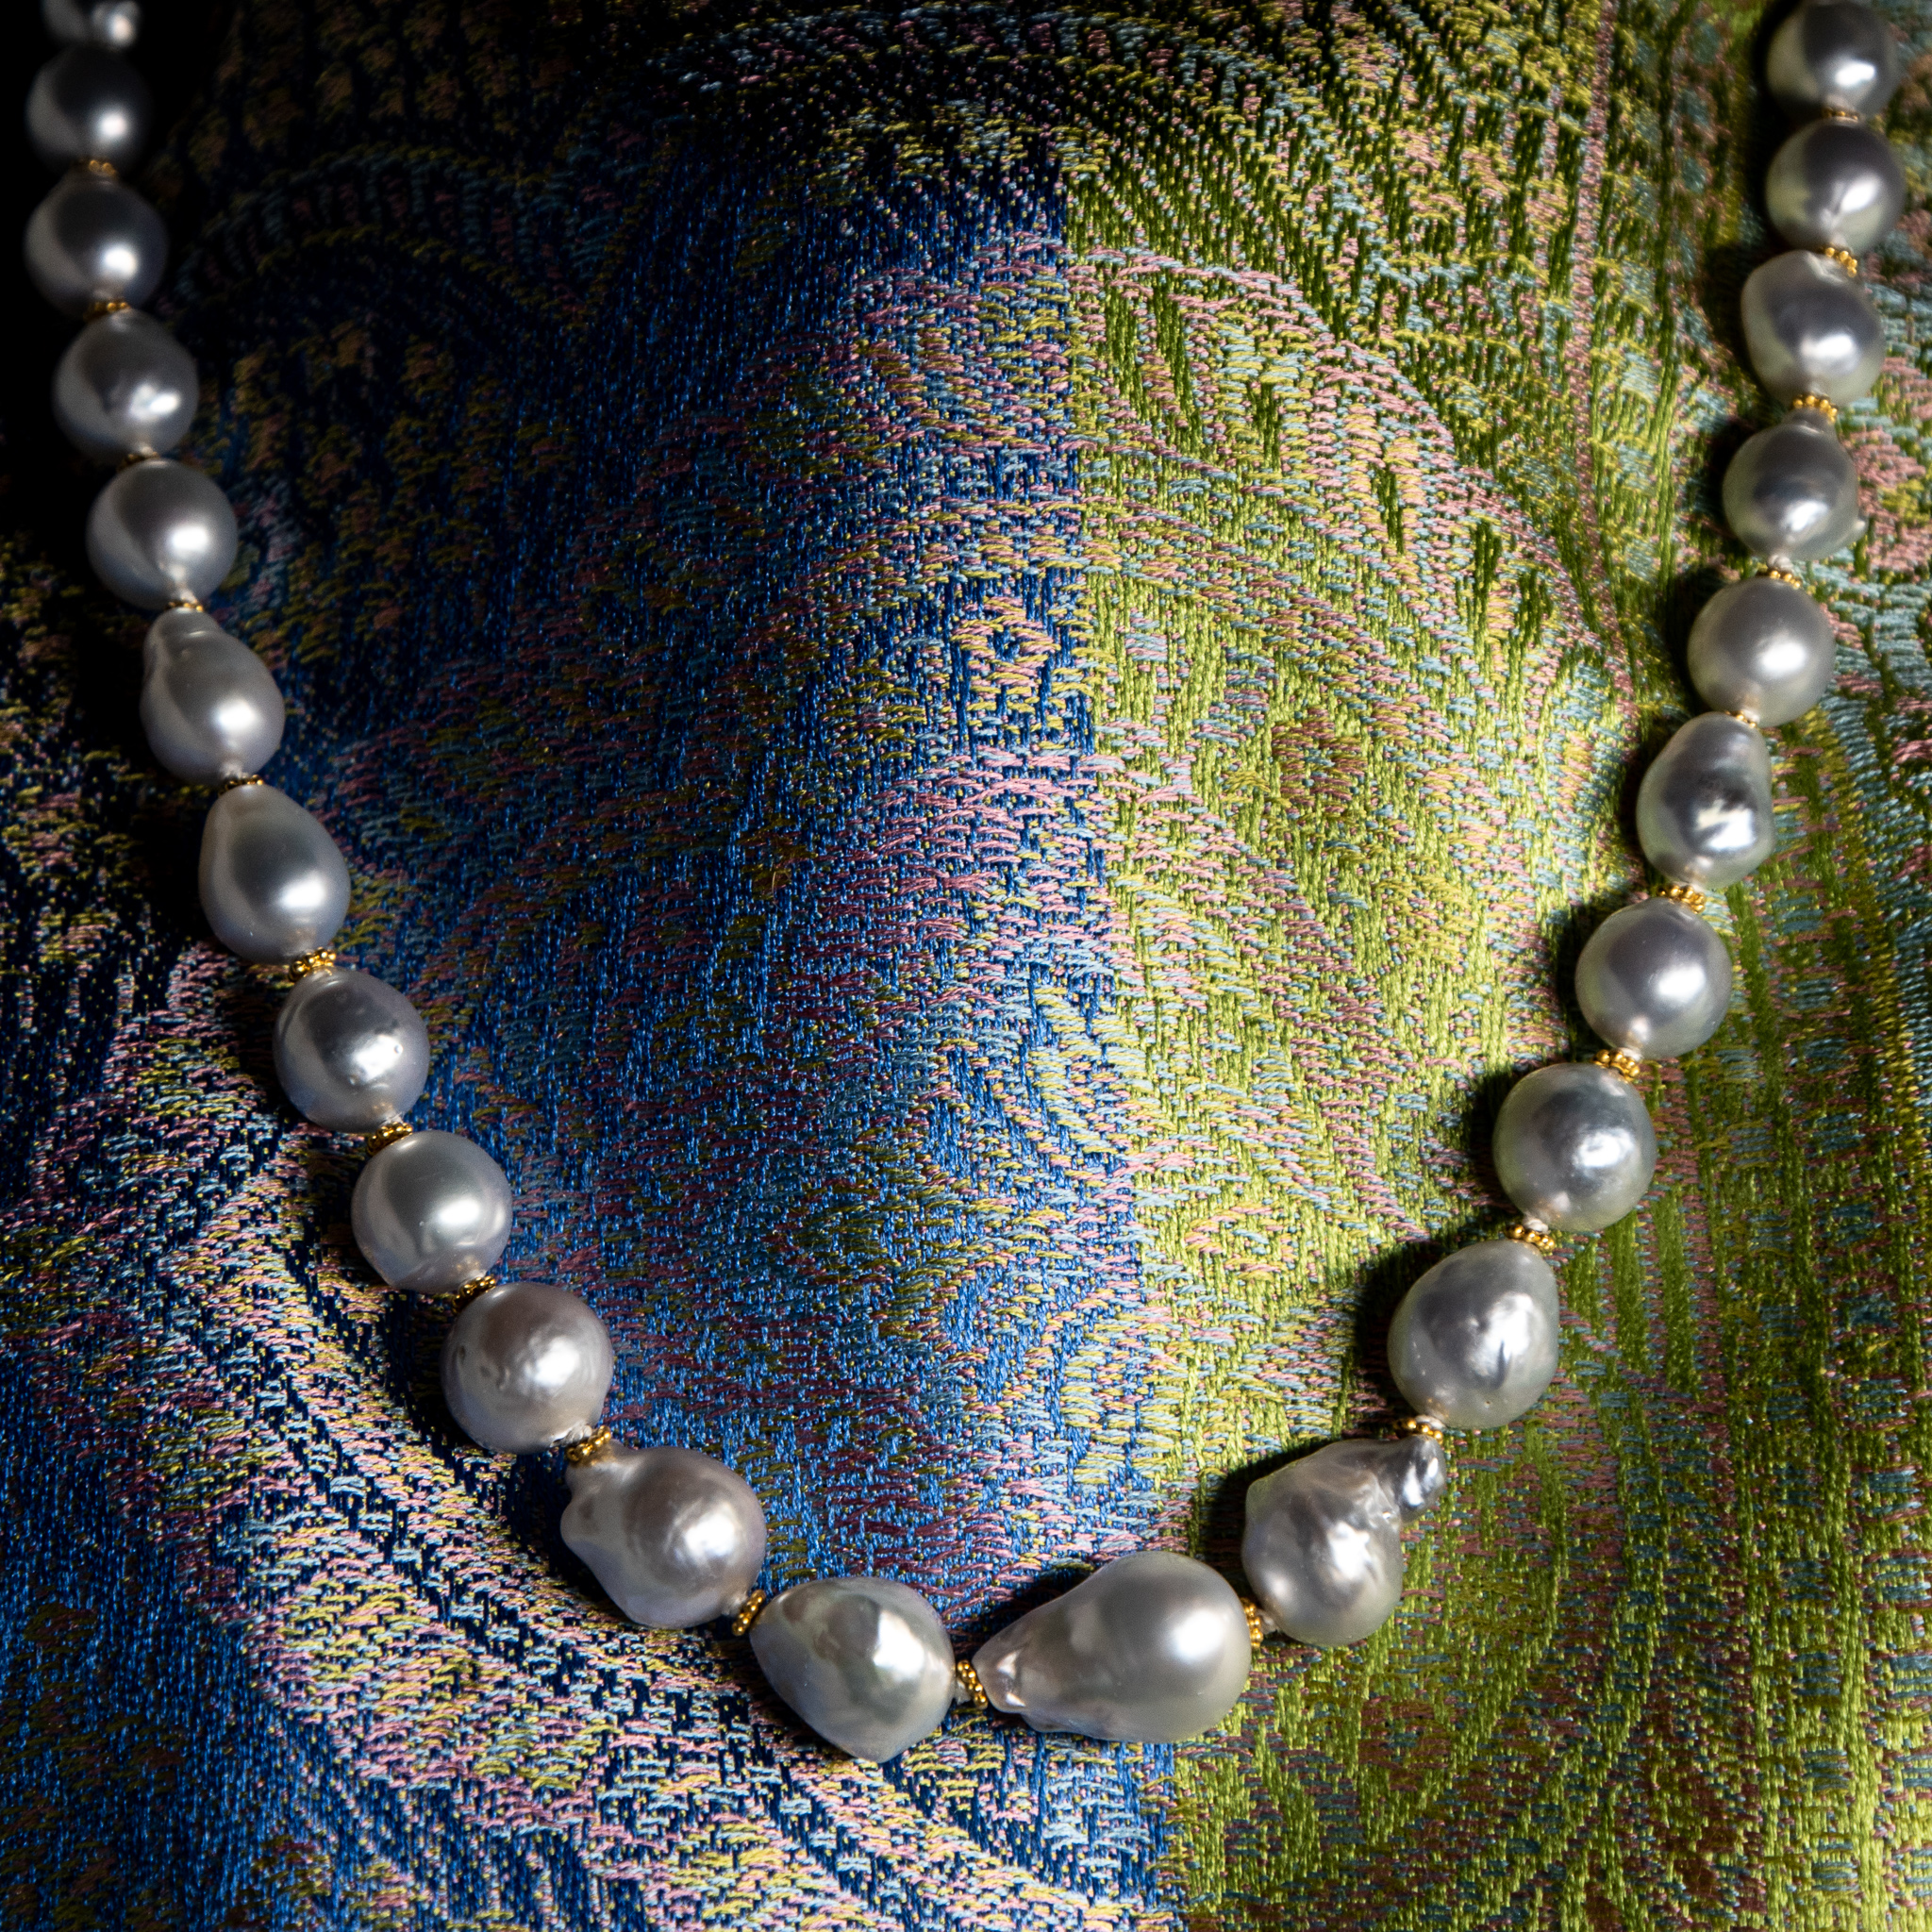 Silvery south sea pearl necklace with 22K gold accents shown on violet and chartreuse silk scarf